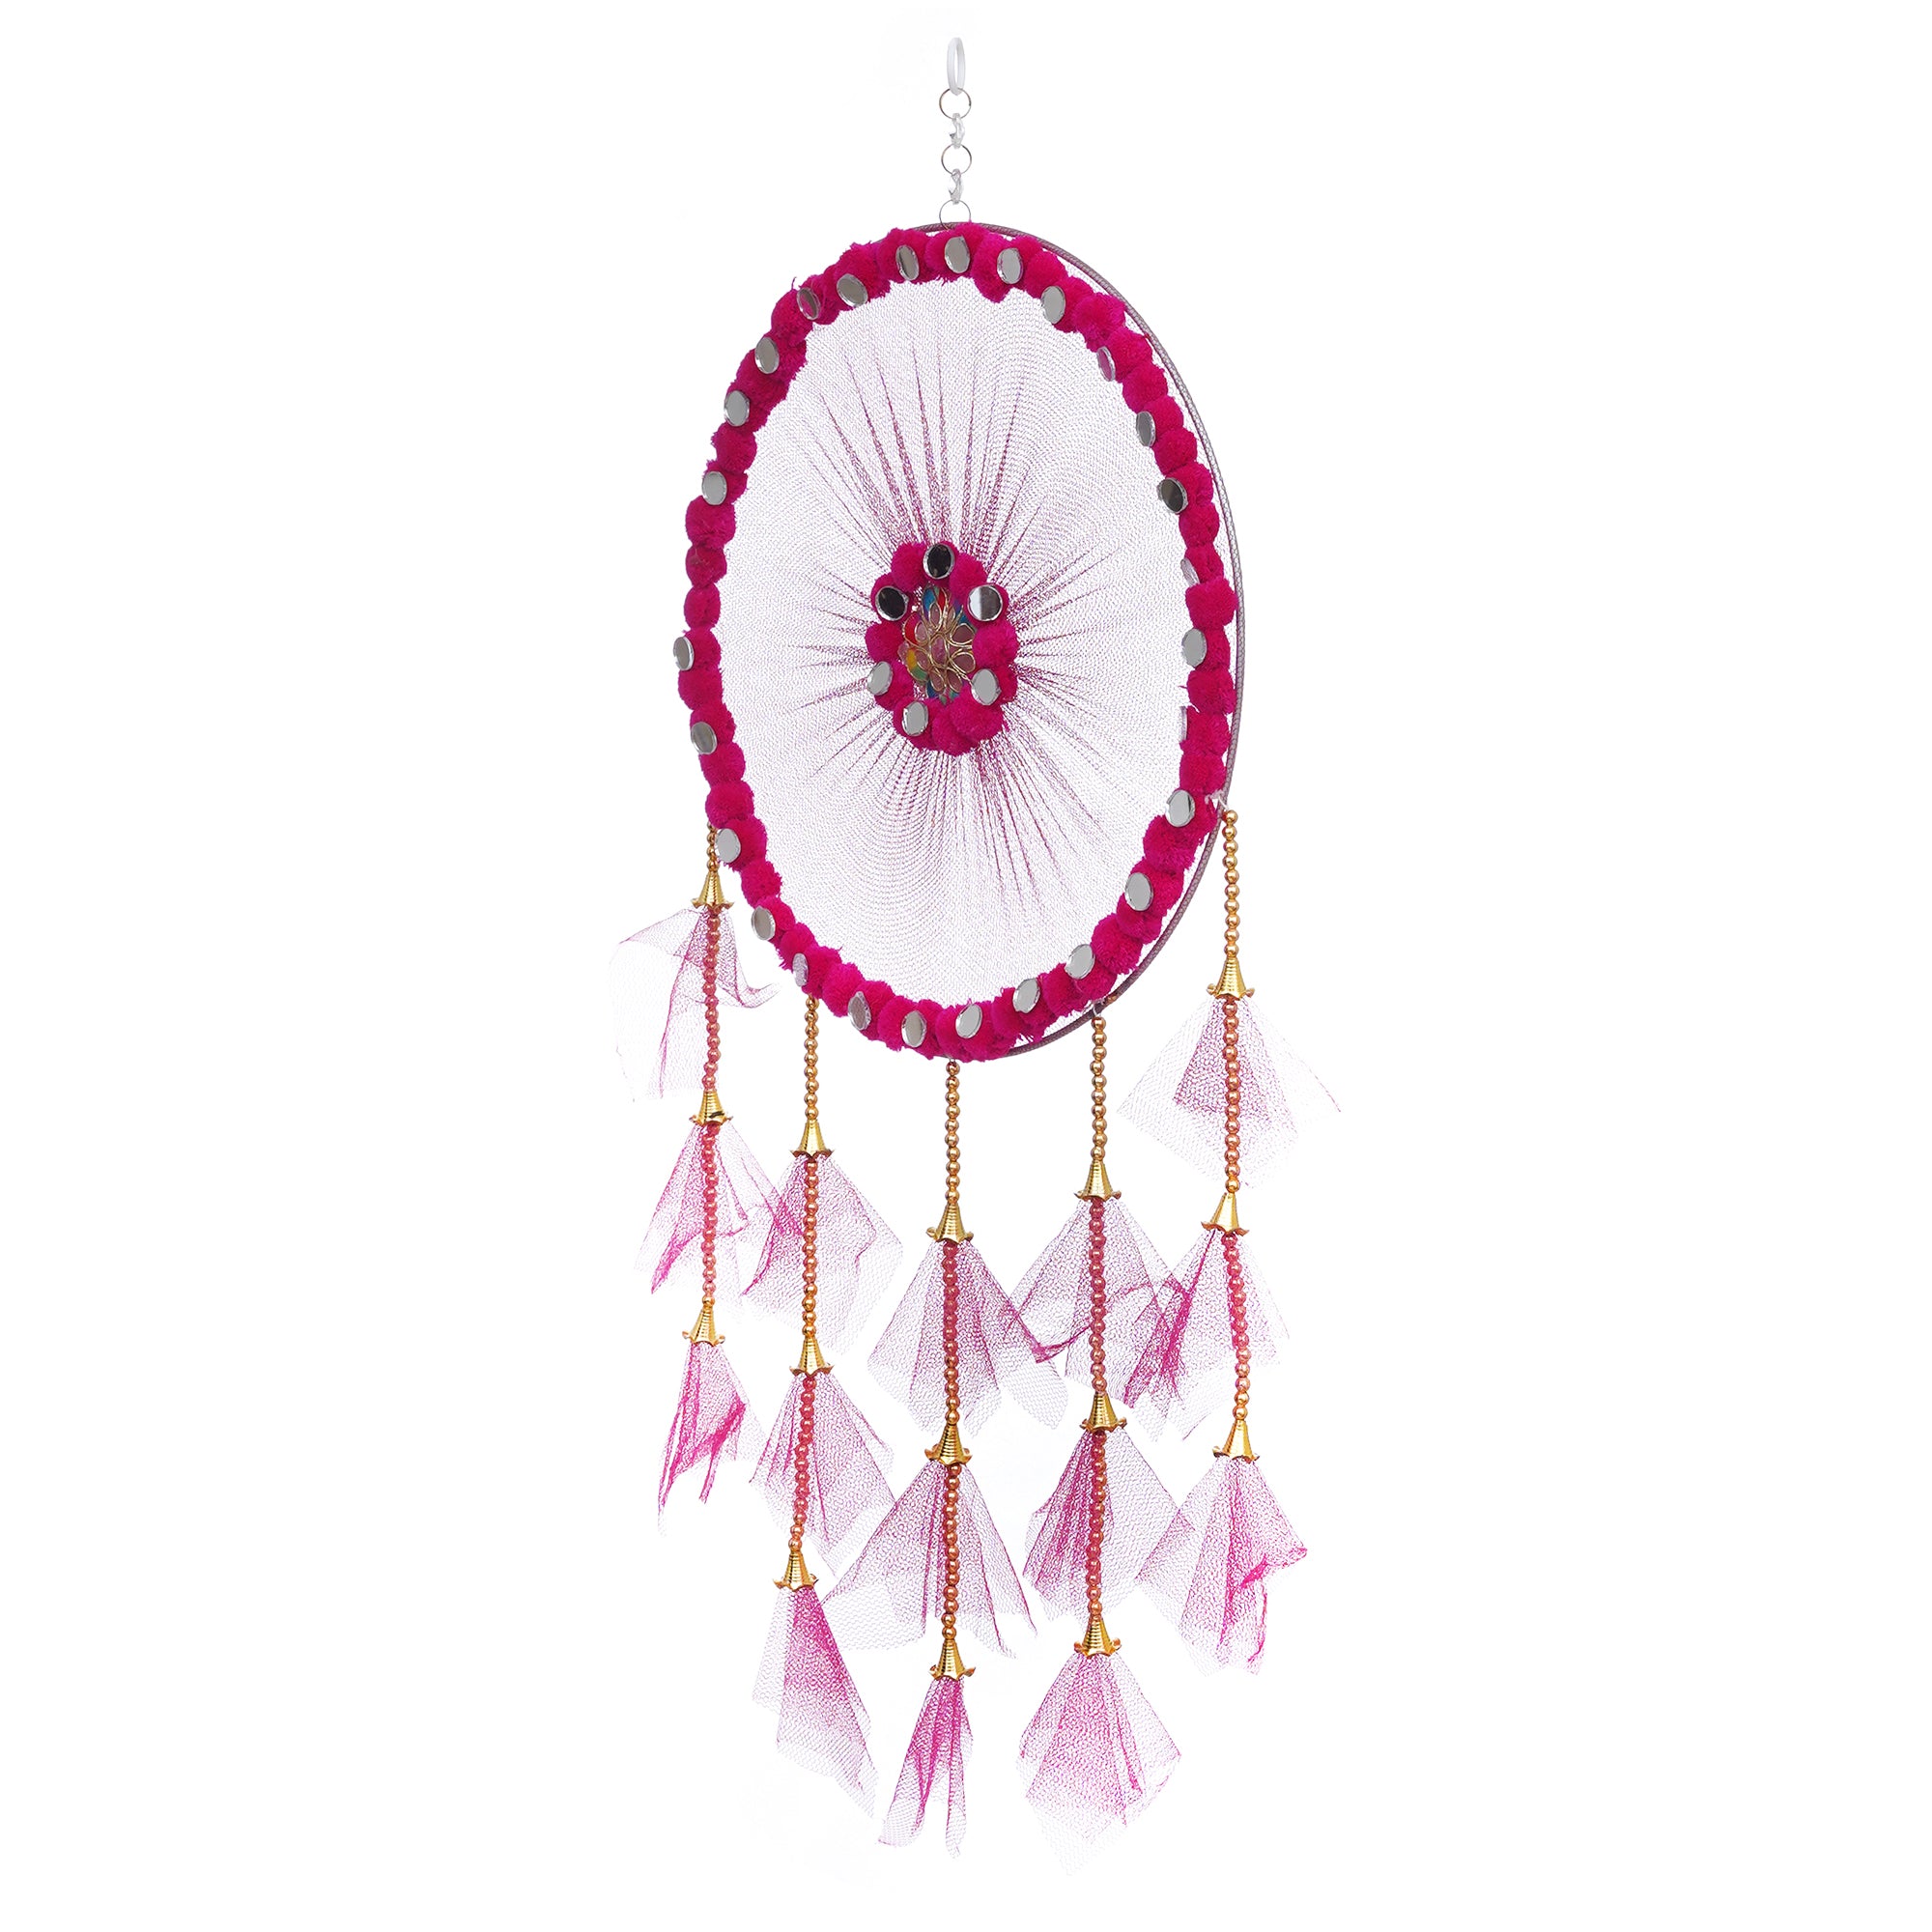 eCraftIndia Pink Wall Hanging Dream Catcher For Home Decor - Perfect Window, Bedroom, Living Room, Wall Decoration Item 6